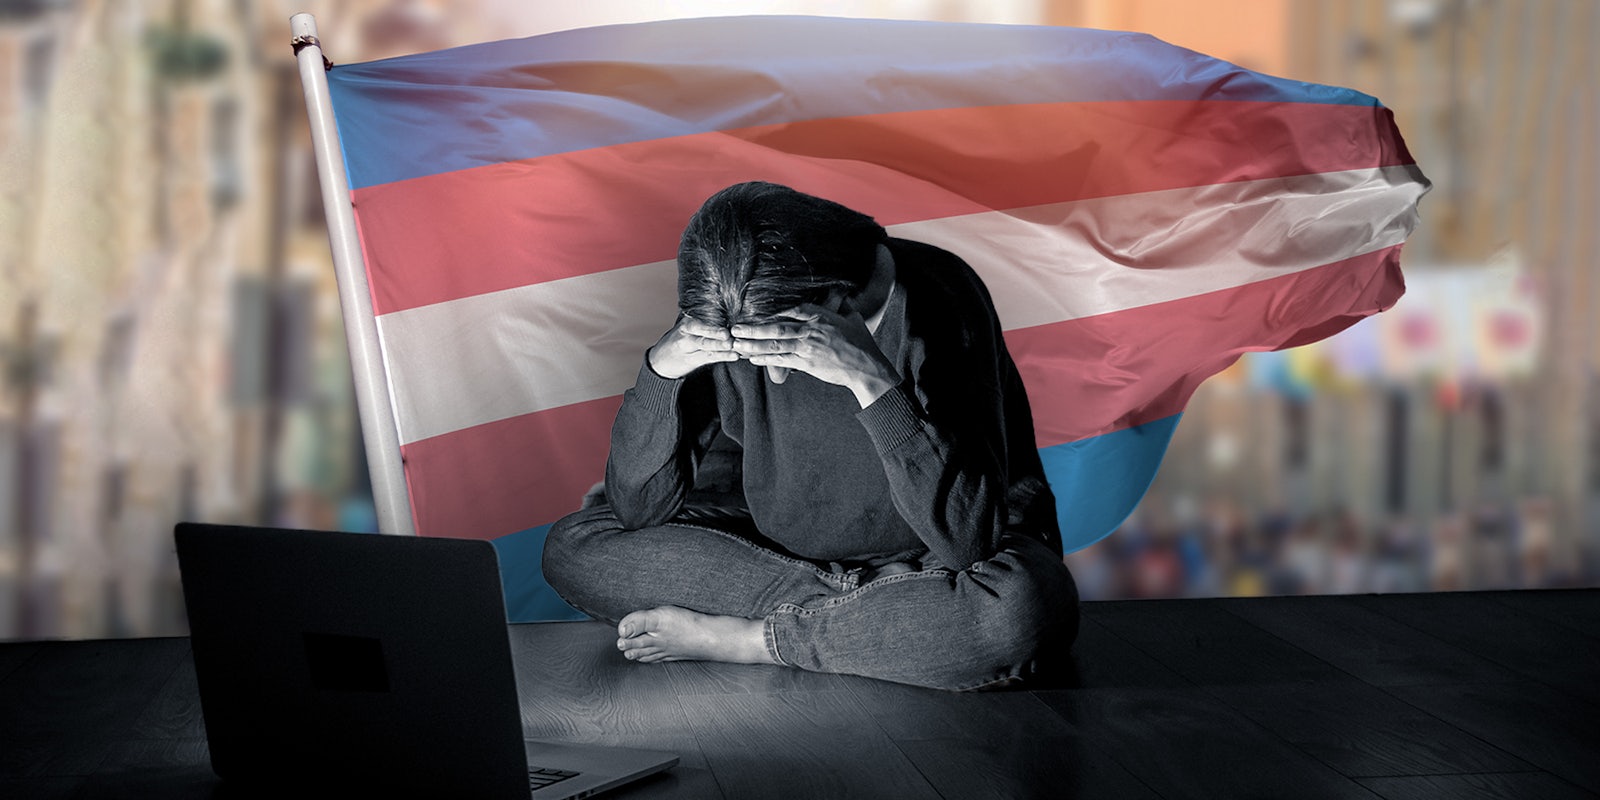 Largest trans survey to date finds that almost 40 percent of trans folks are cyber-bullied